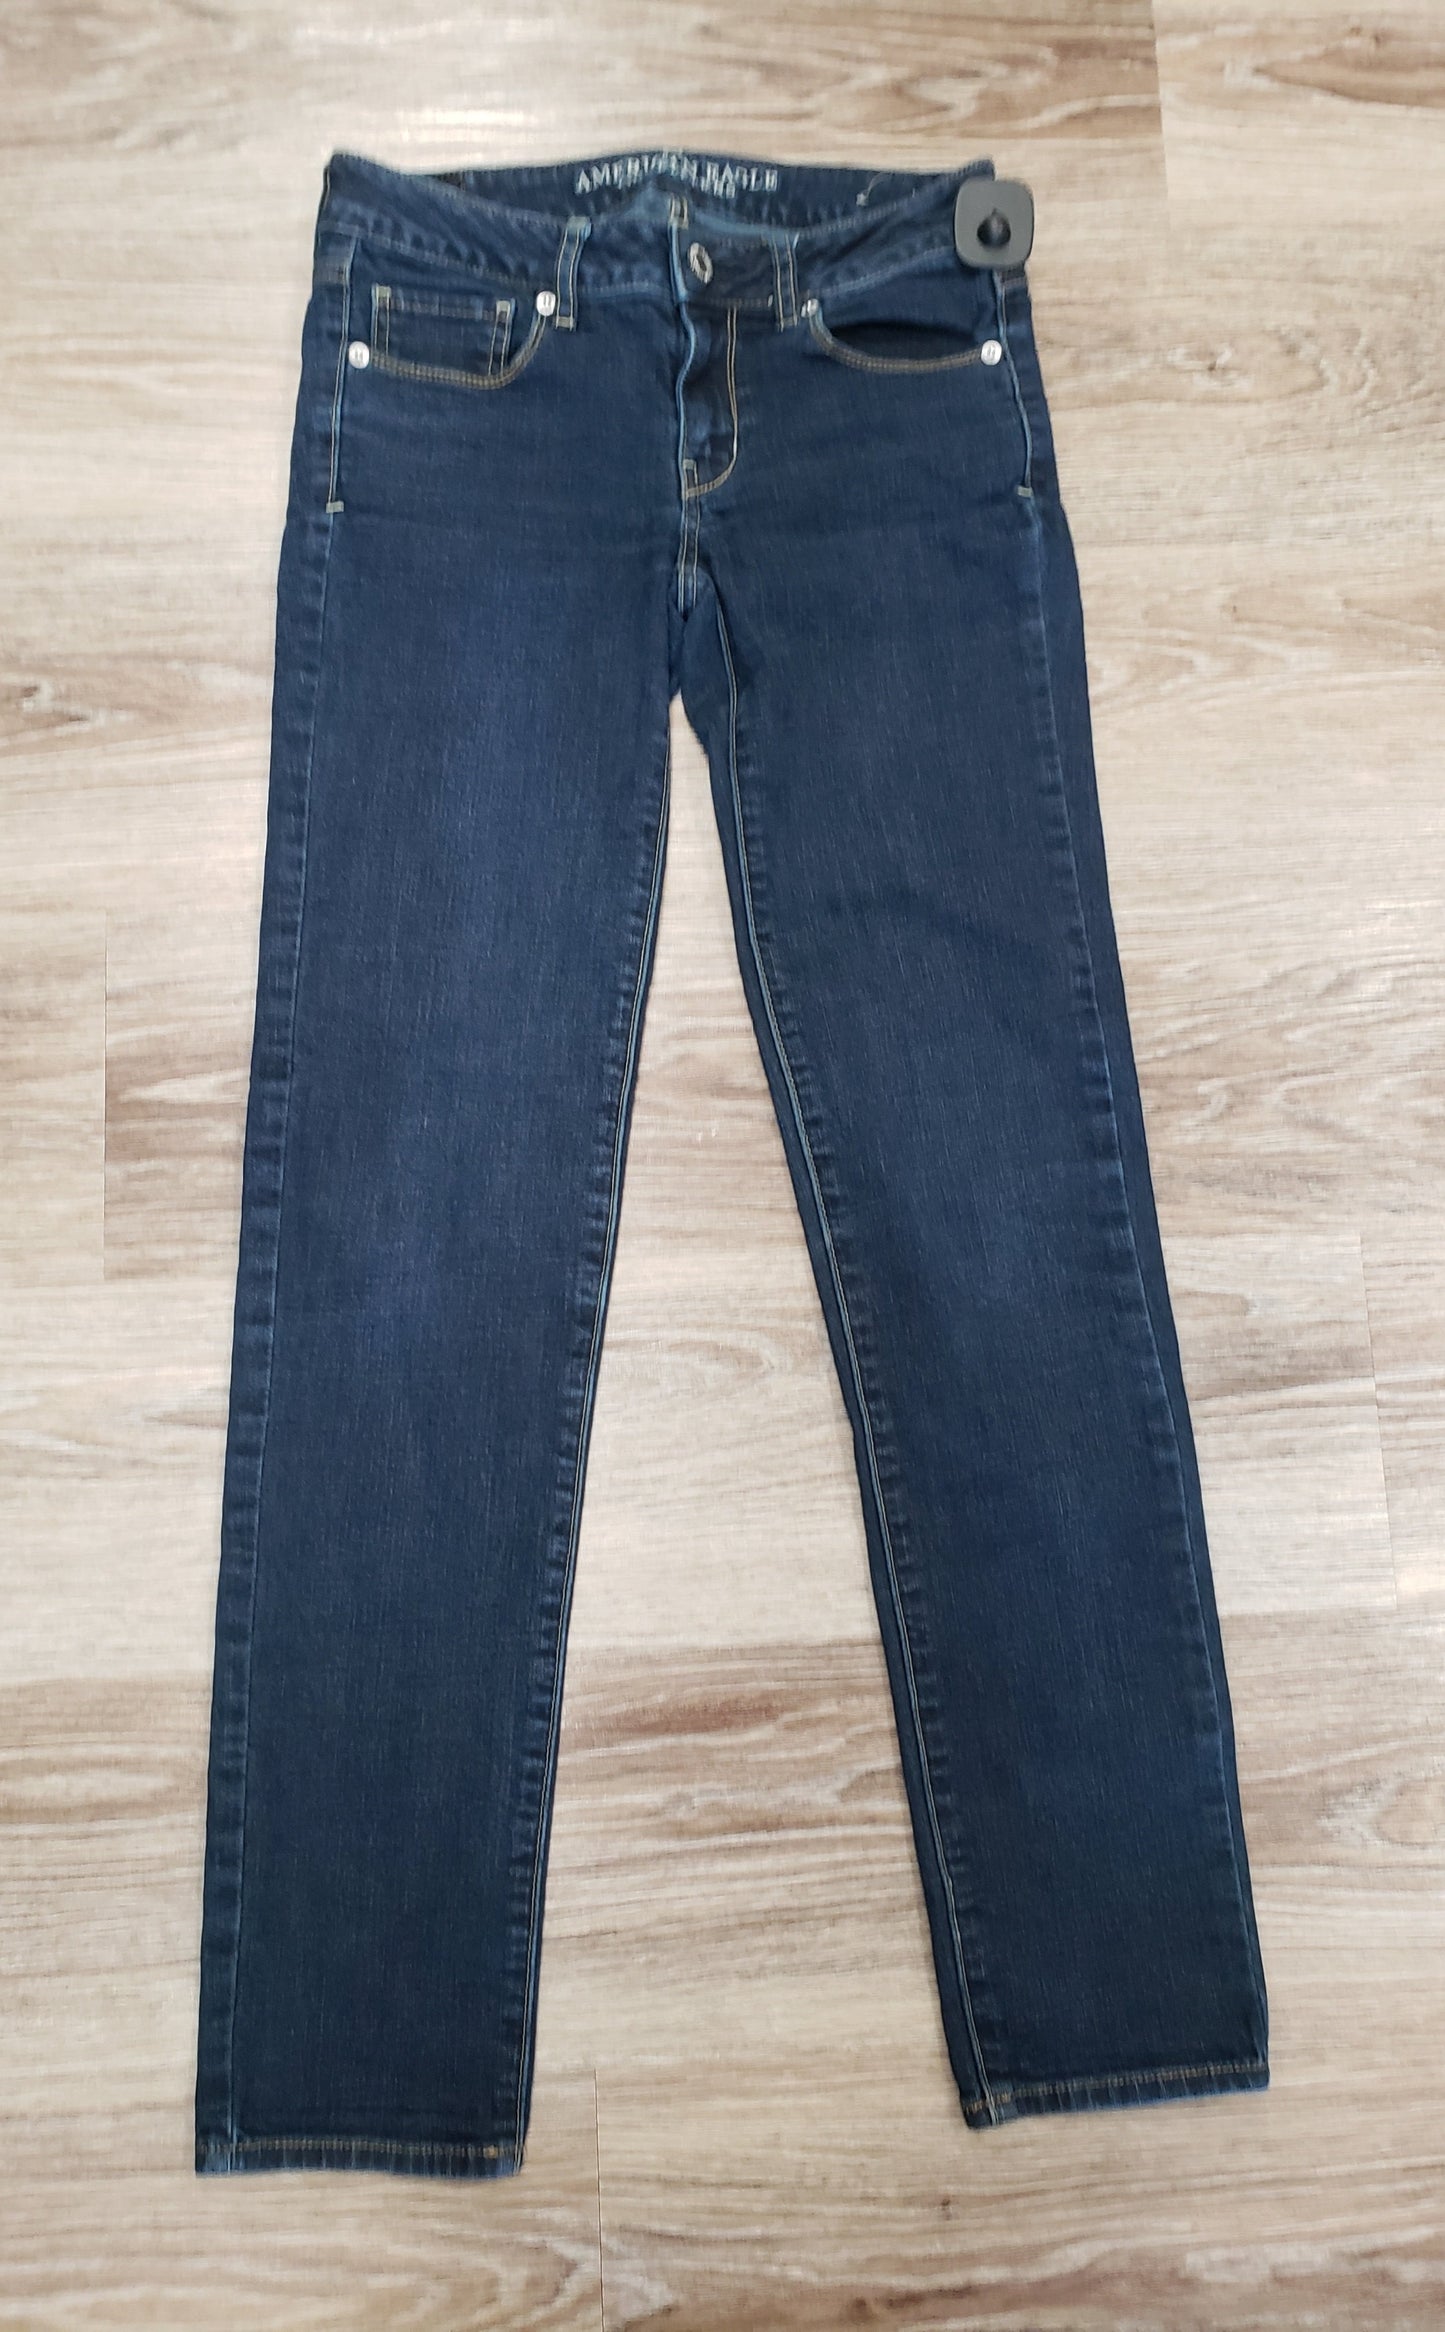 JEANS BY AMERICAN EAGLE SIZE 2